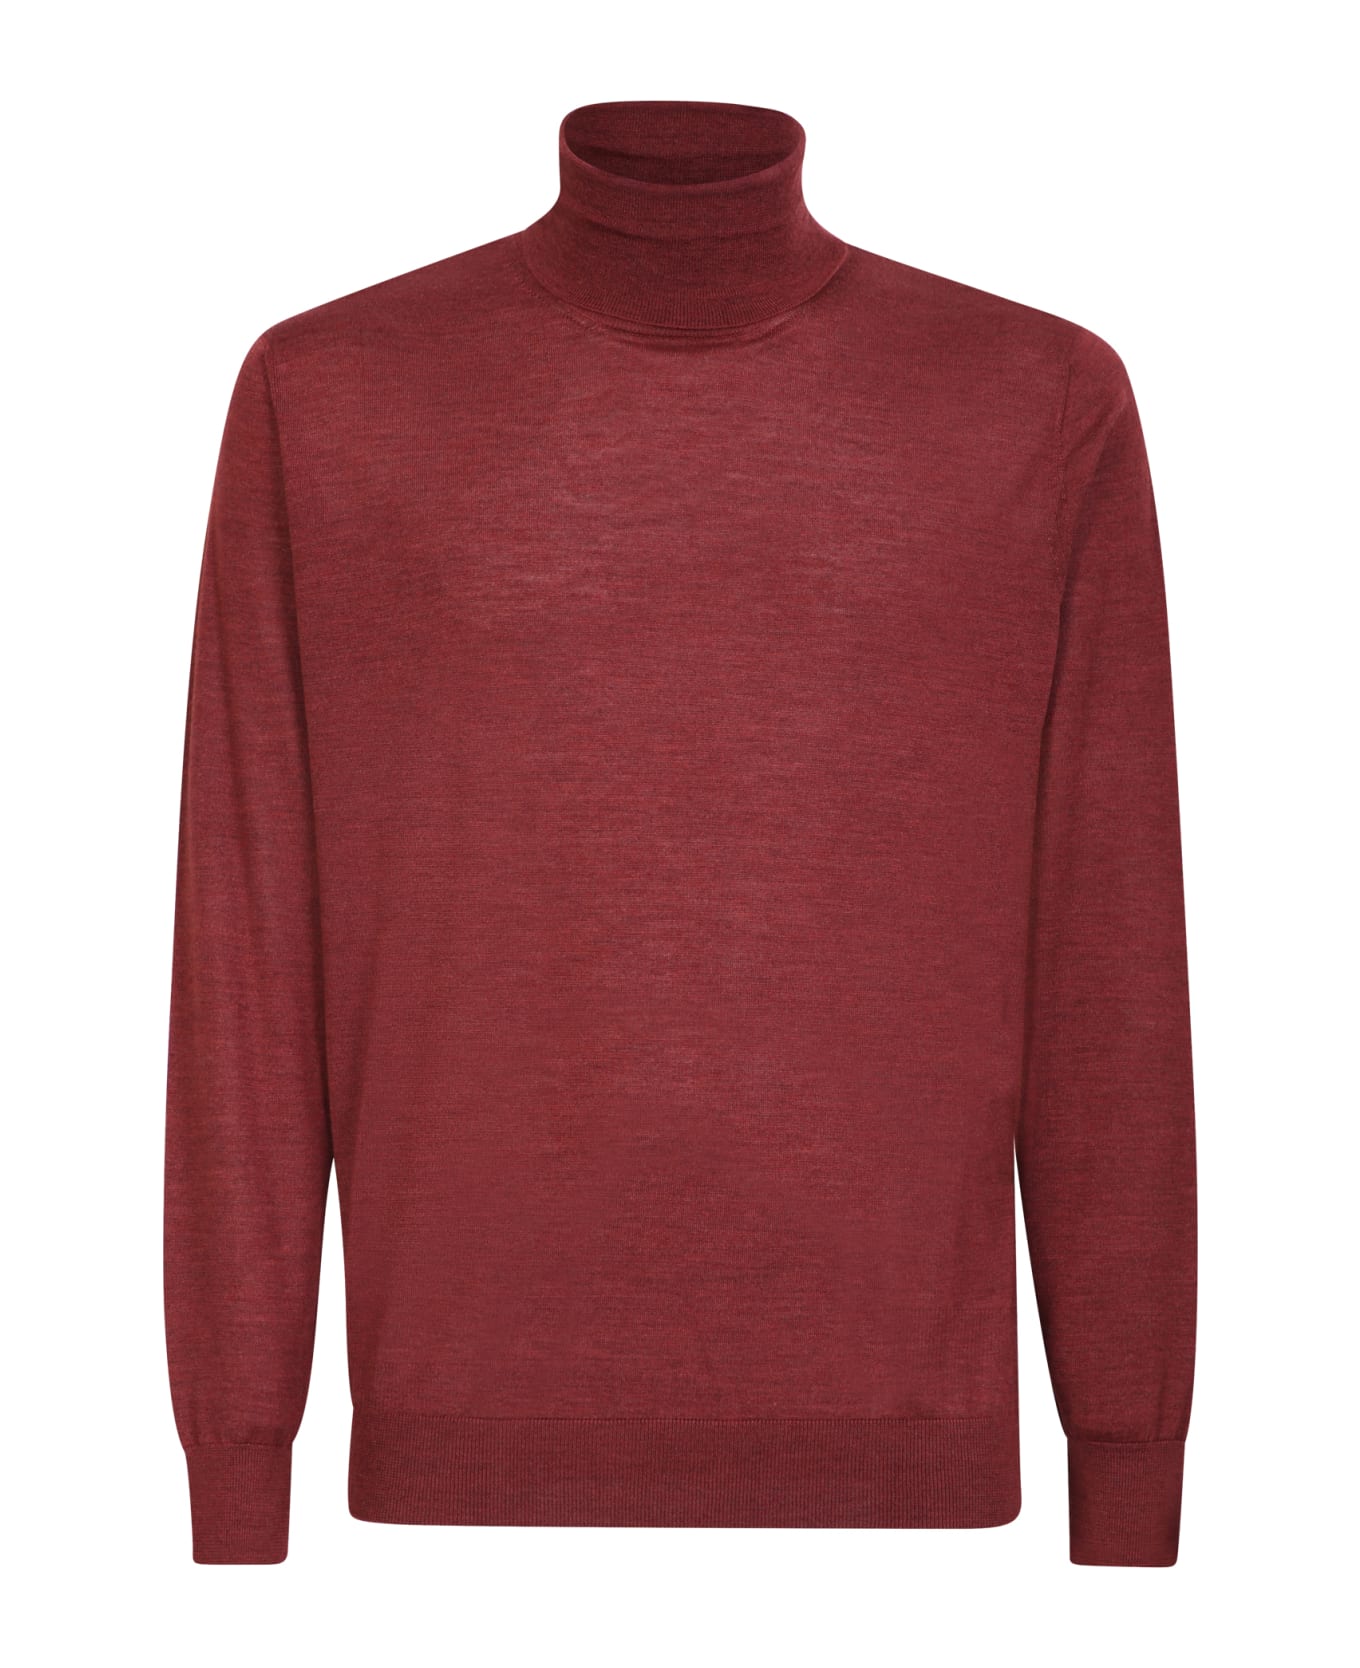 Colombo Silk And Cashmere Sweater - Bordeaux ニットウェア